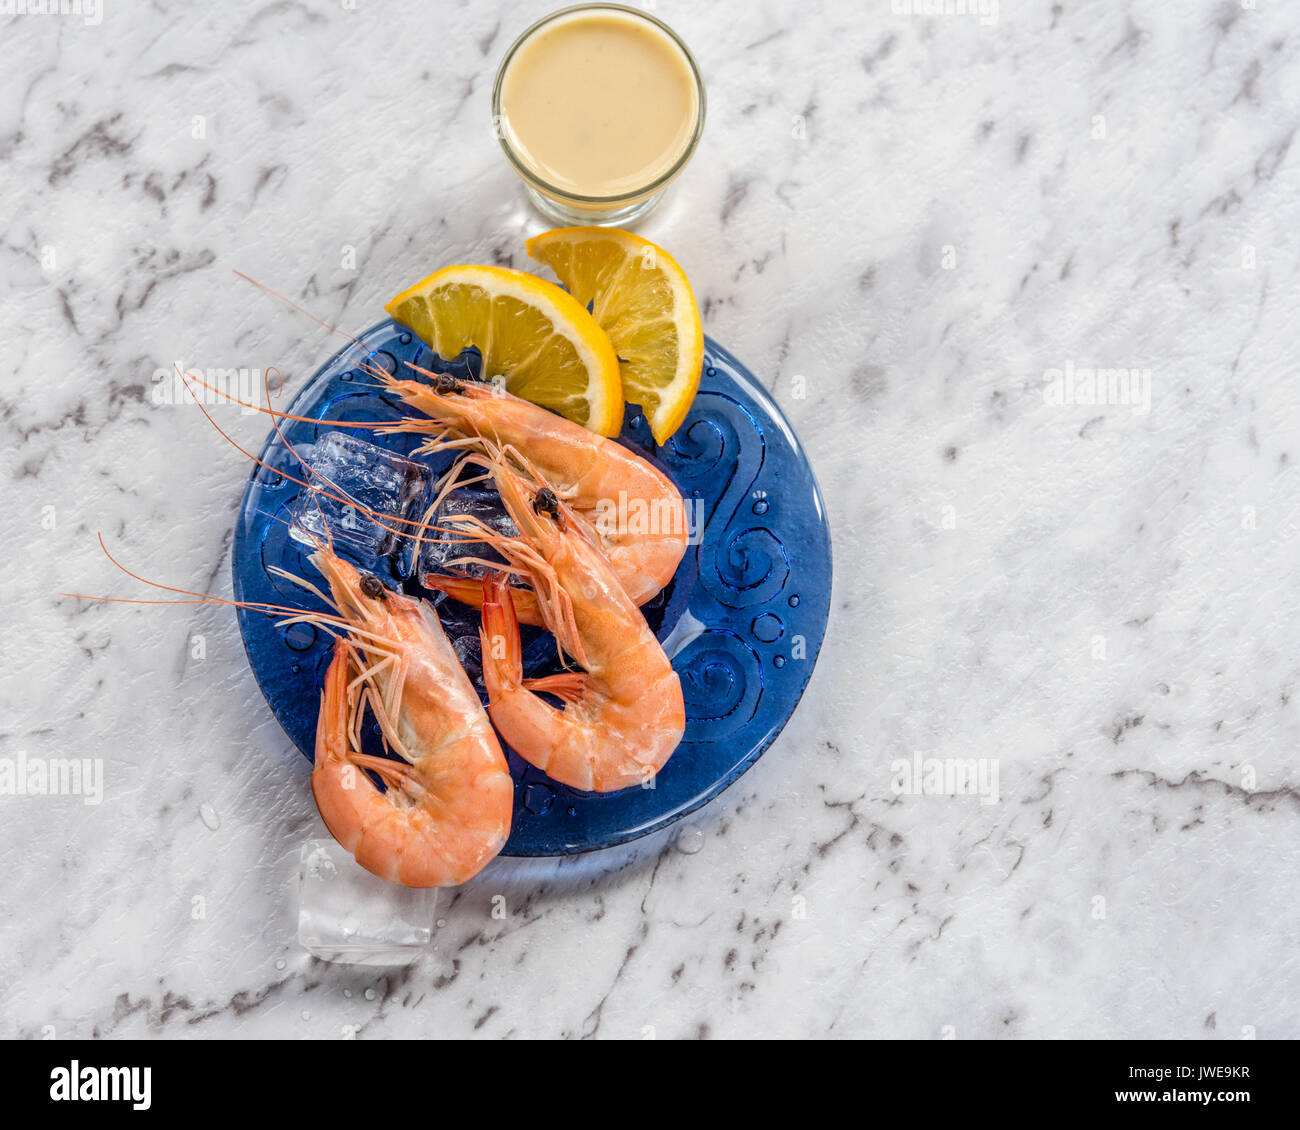 Shrimp on blue plate with sauce white marble background.  Prawn on blue plate with sauce, ice, lemon slices, white marble background. Stock Photo